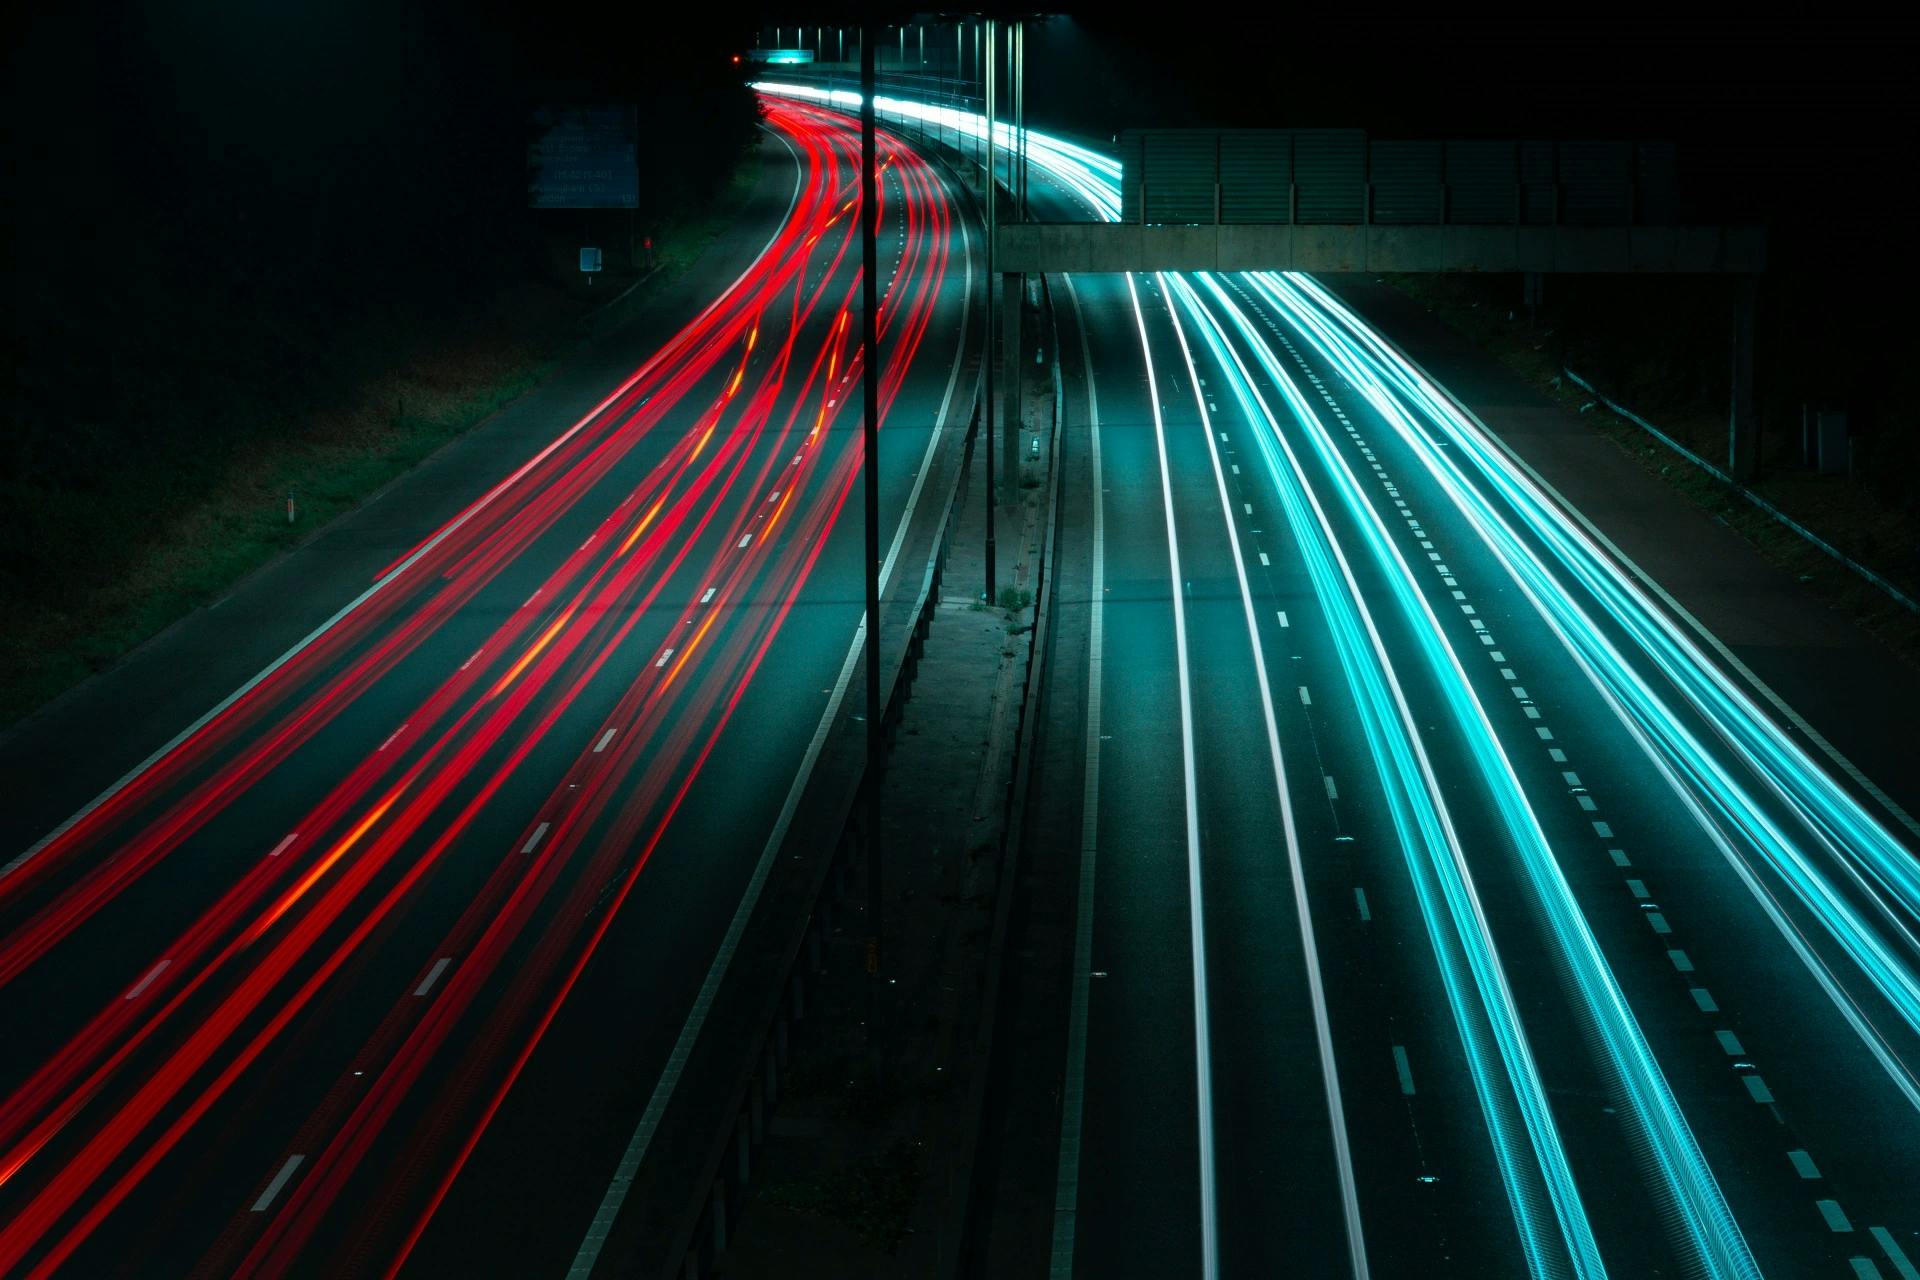 photo of a highway taken from above showing the headlight and brakelight lighttrails left from cars